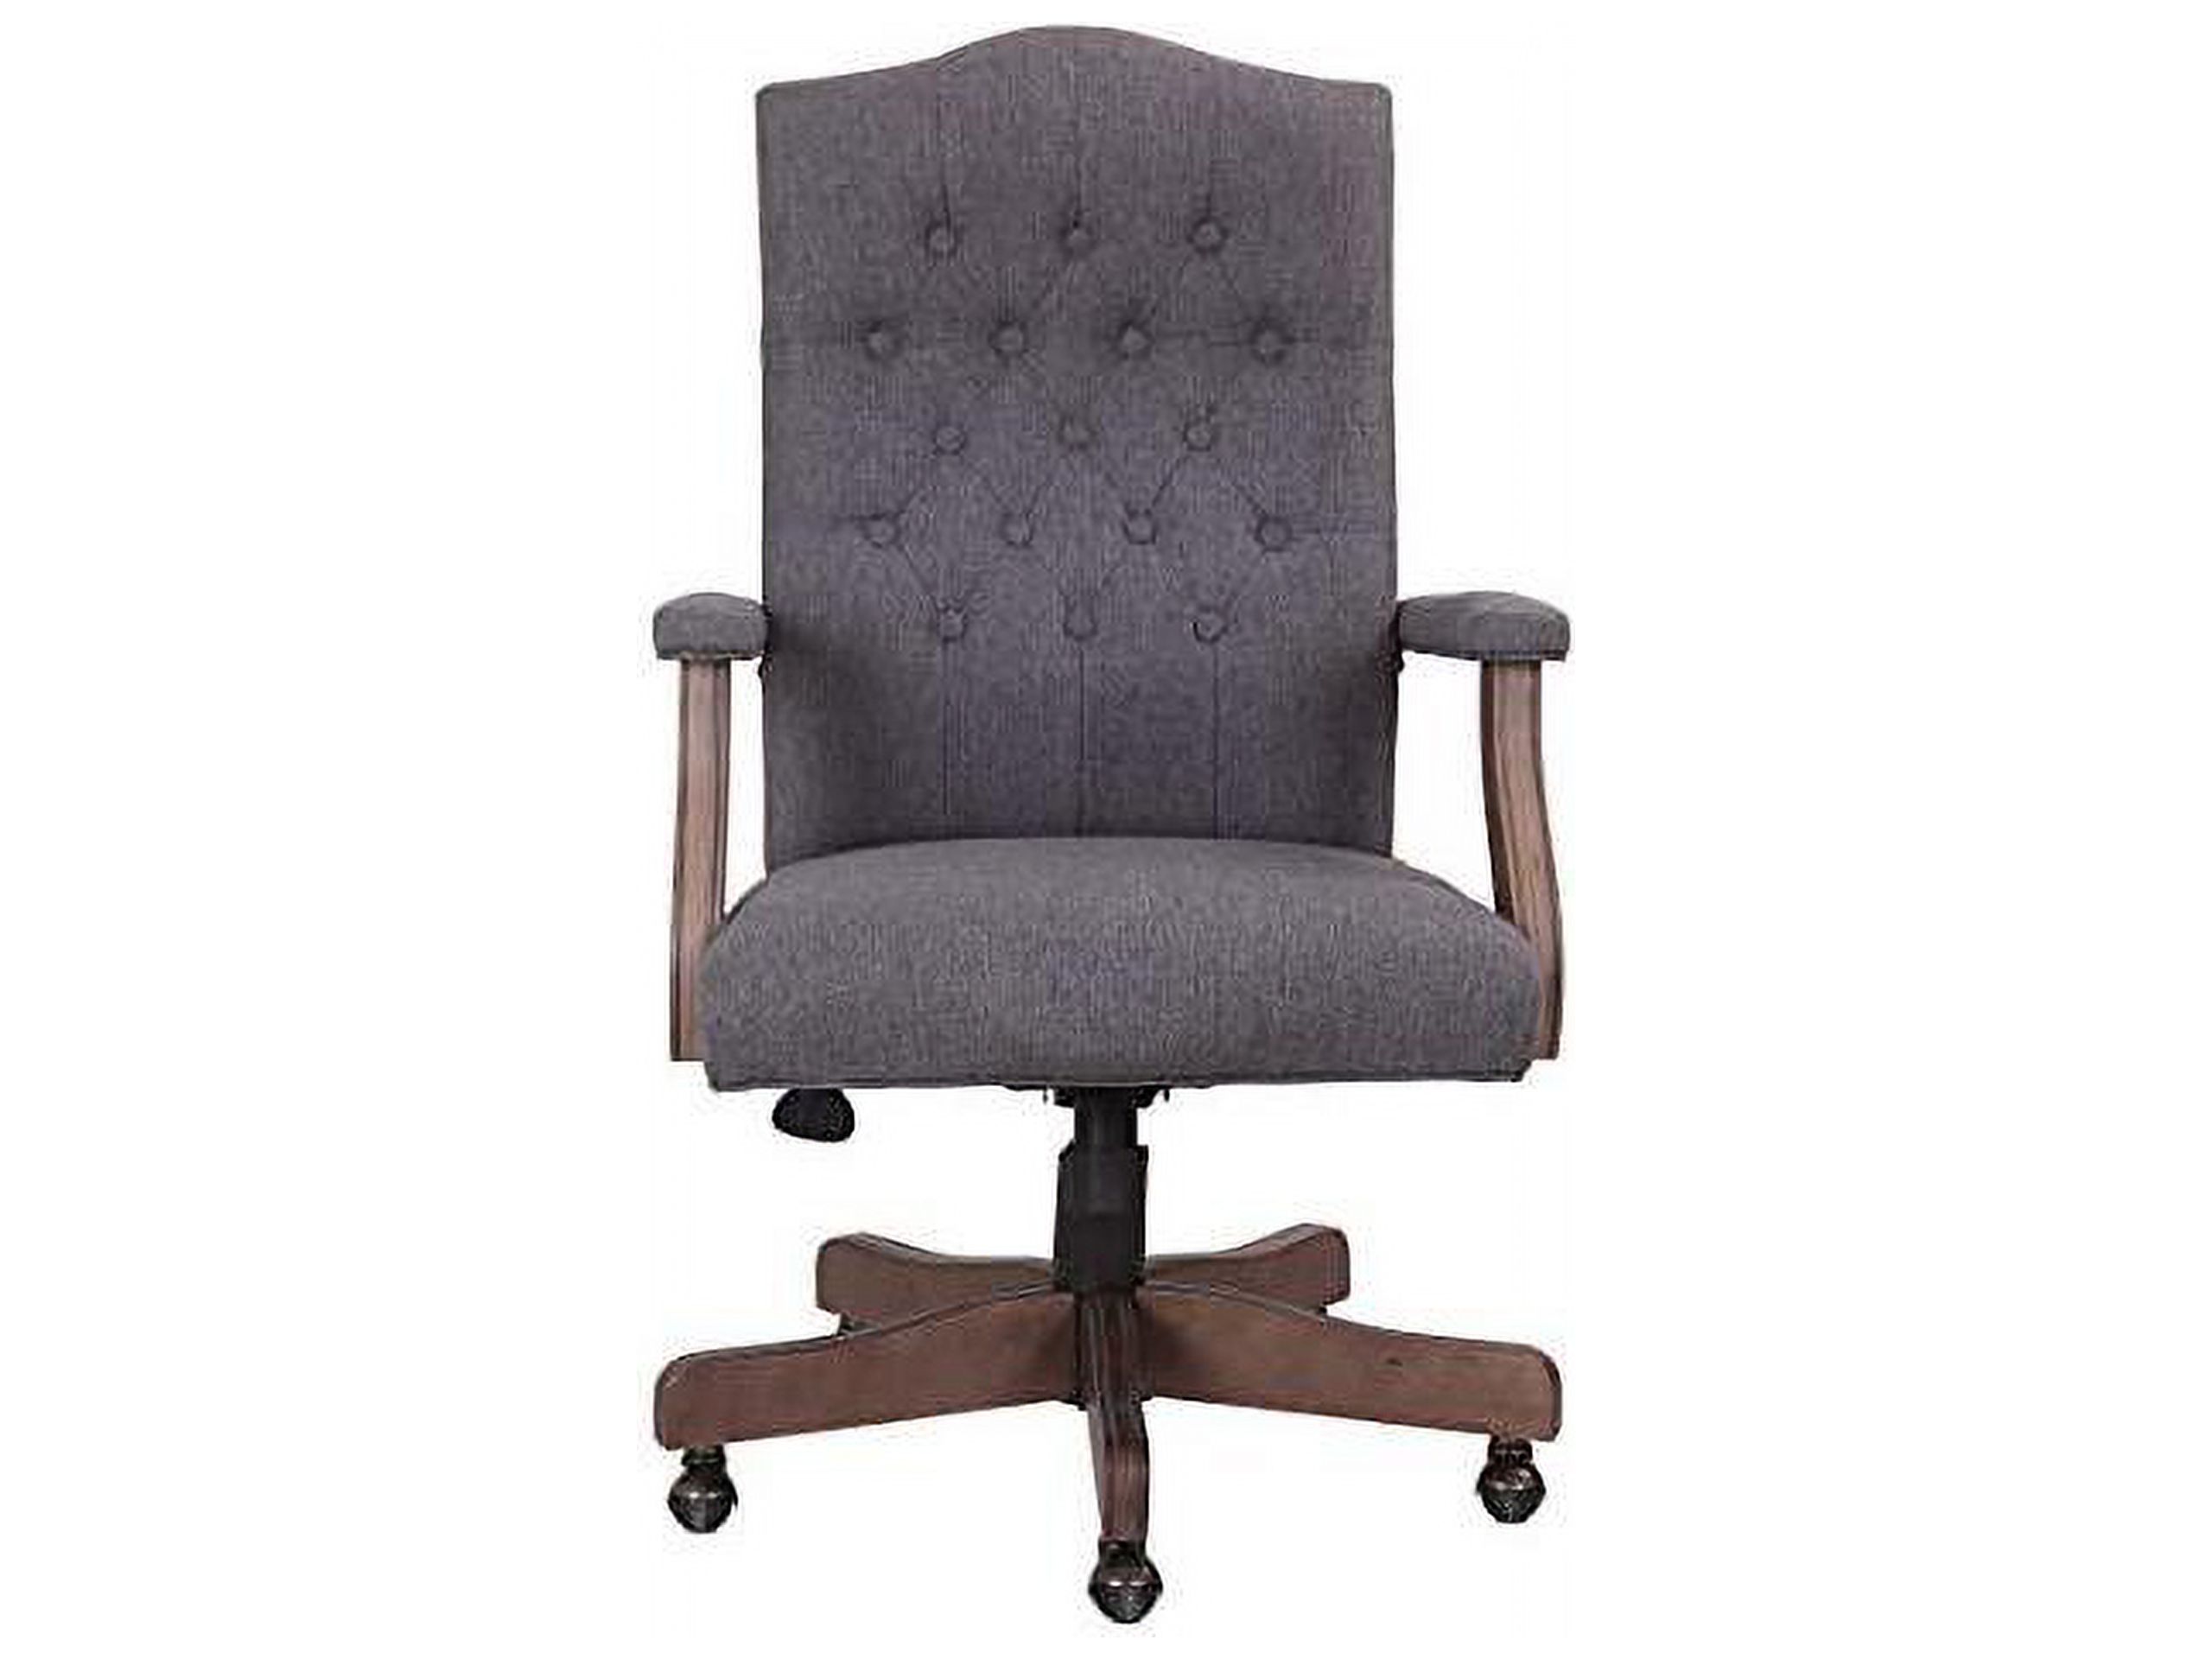 Boss Refined Rustic Executive Chair in Slate Gray Commercial Grade - image 2 of 8